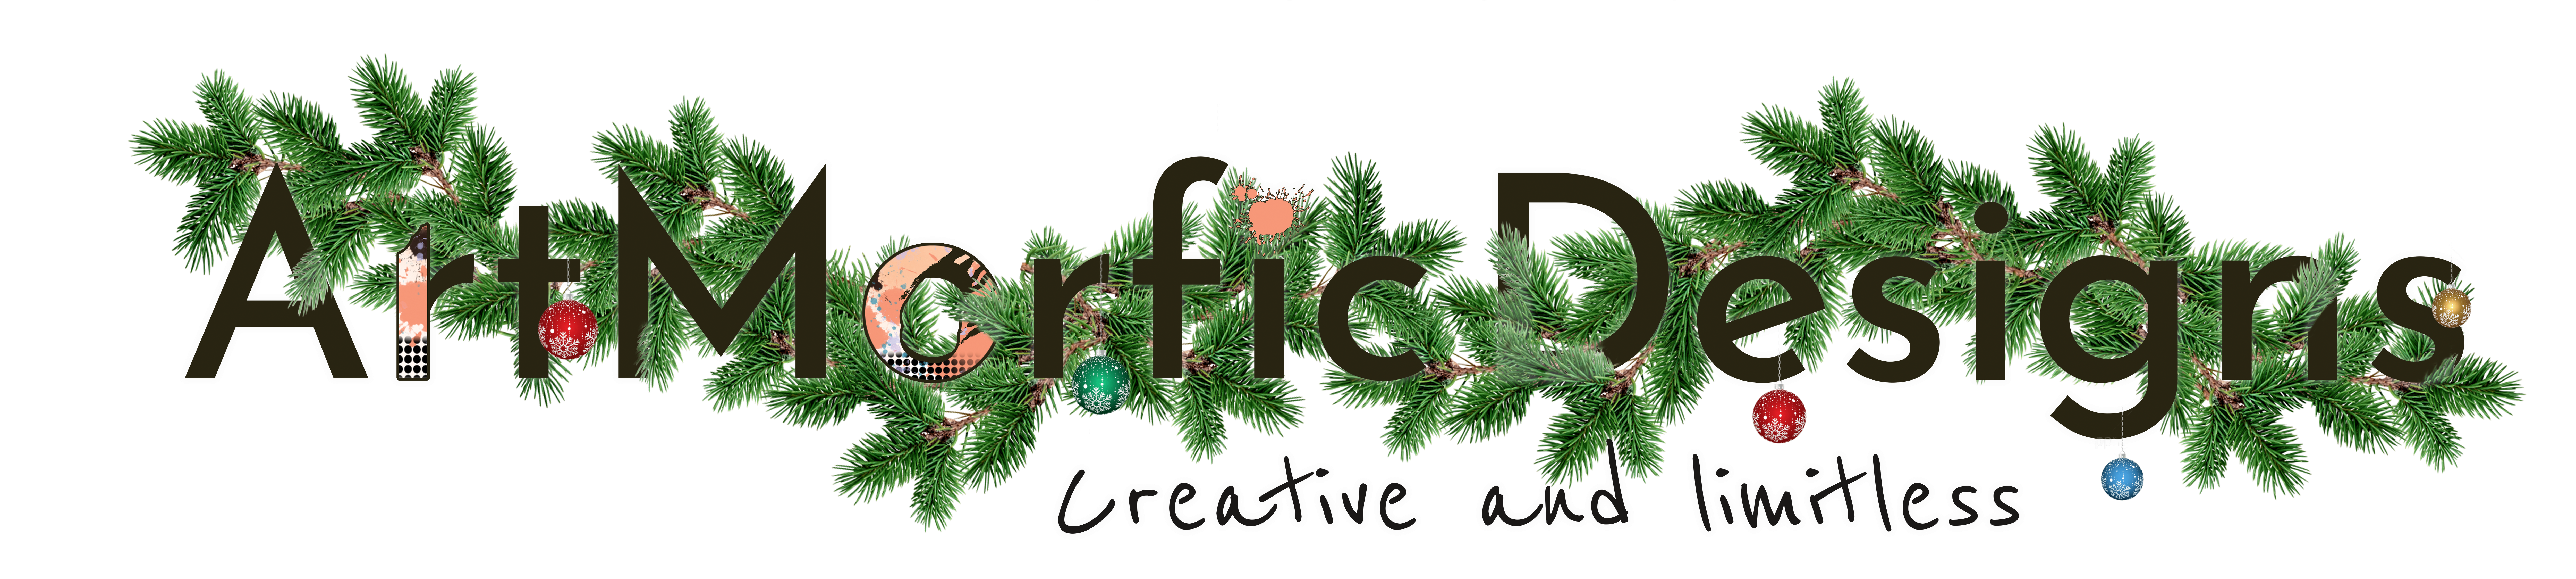 ArtMorfic Designs - Artistic Gifts, Apparel, Merchandise and Art for Creative People